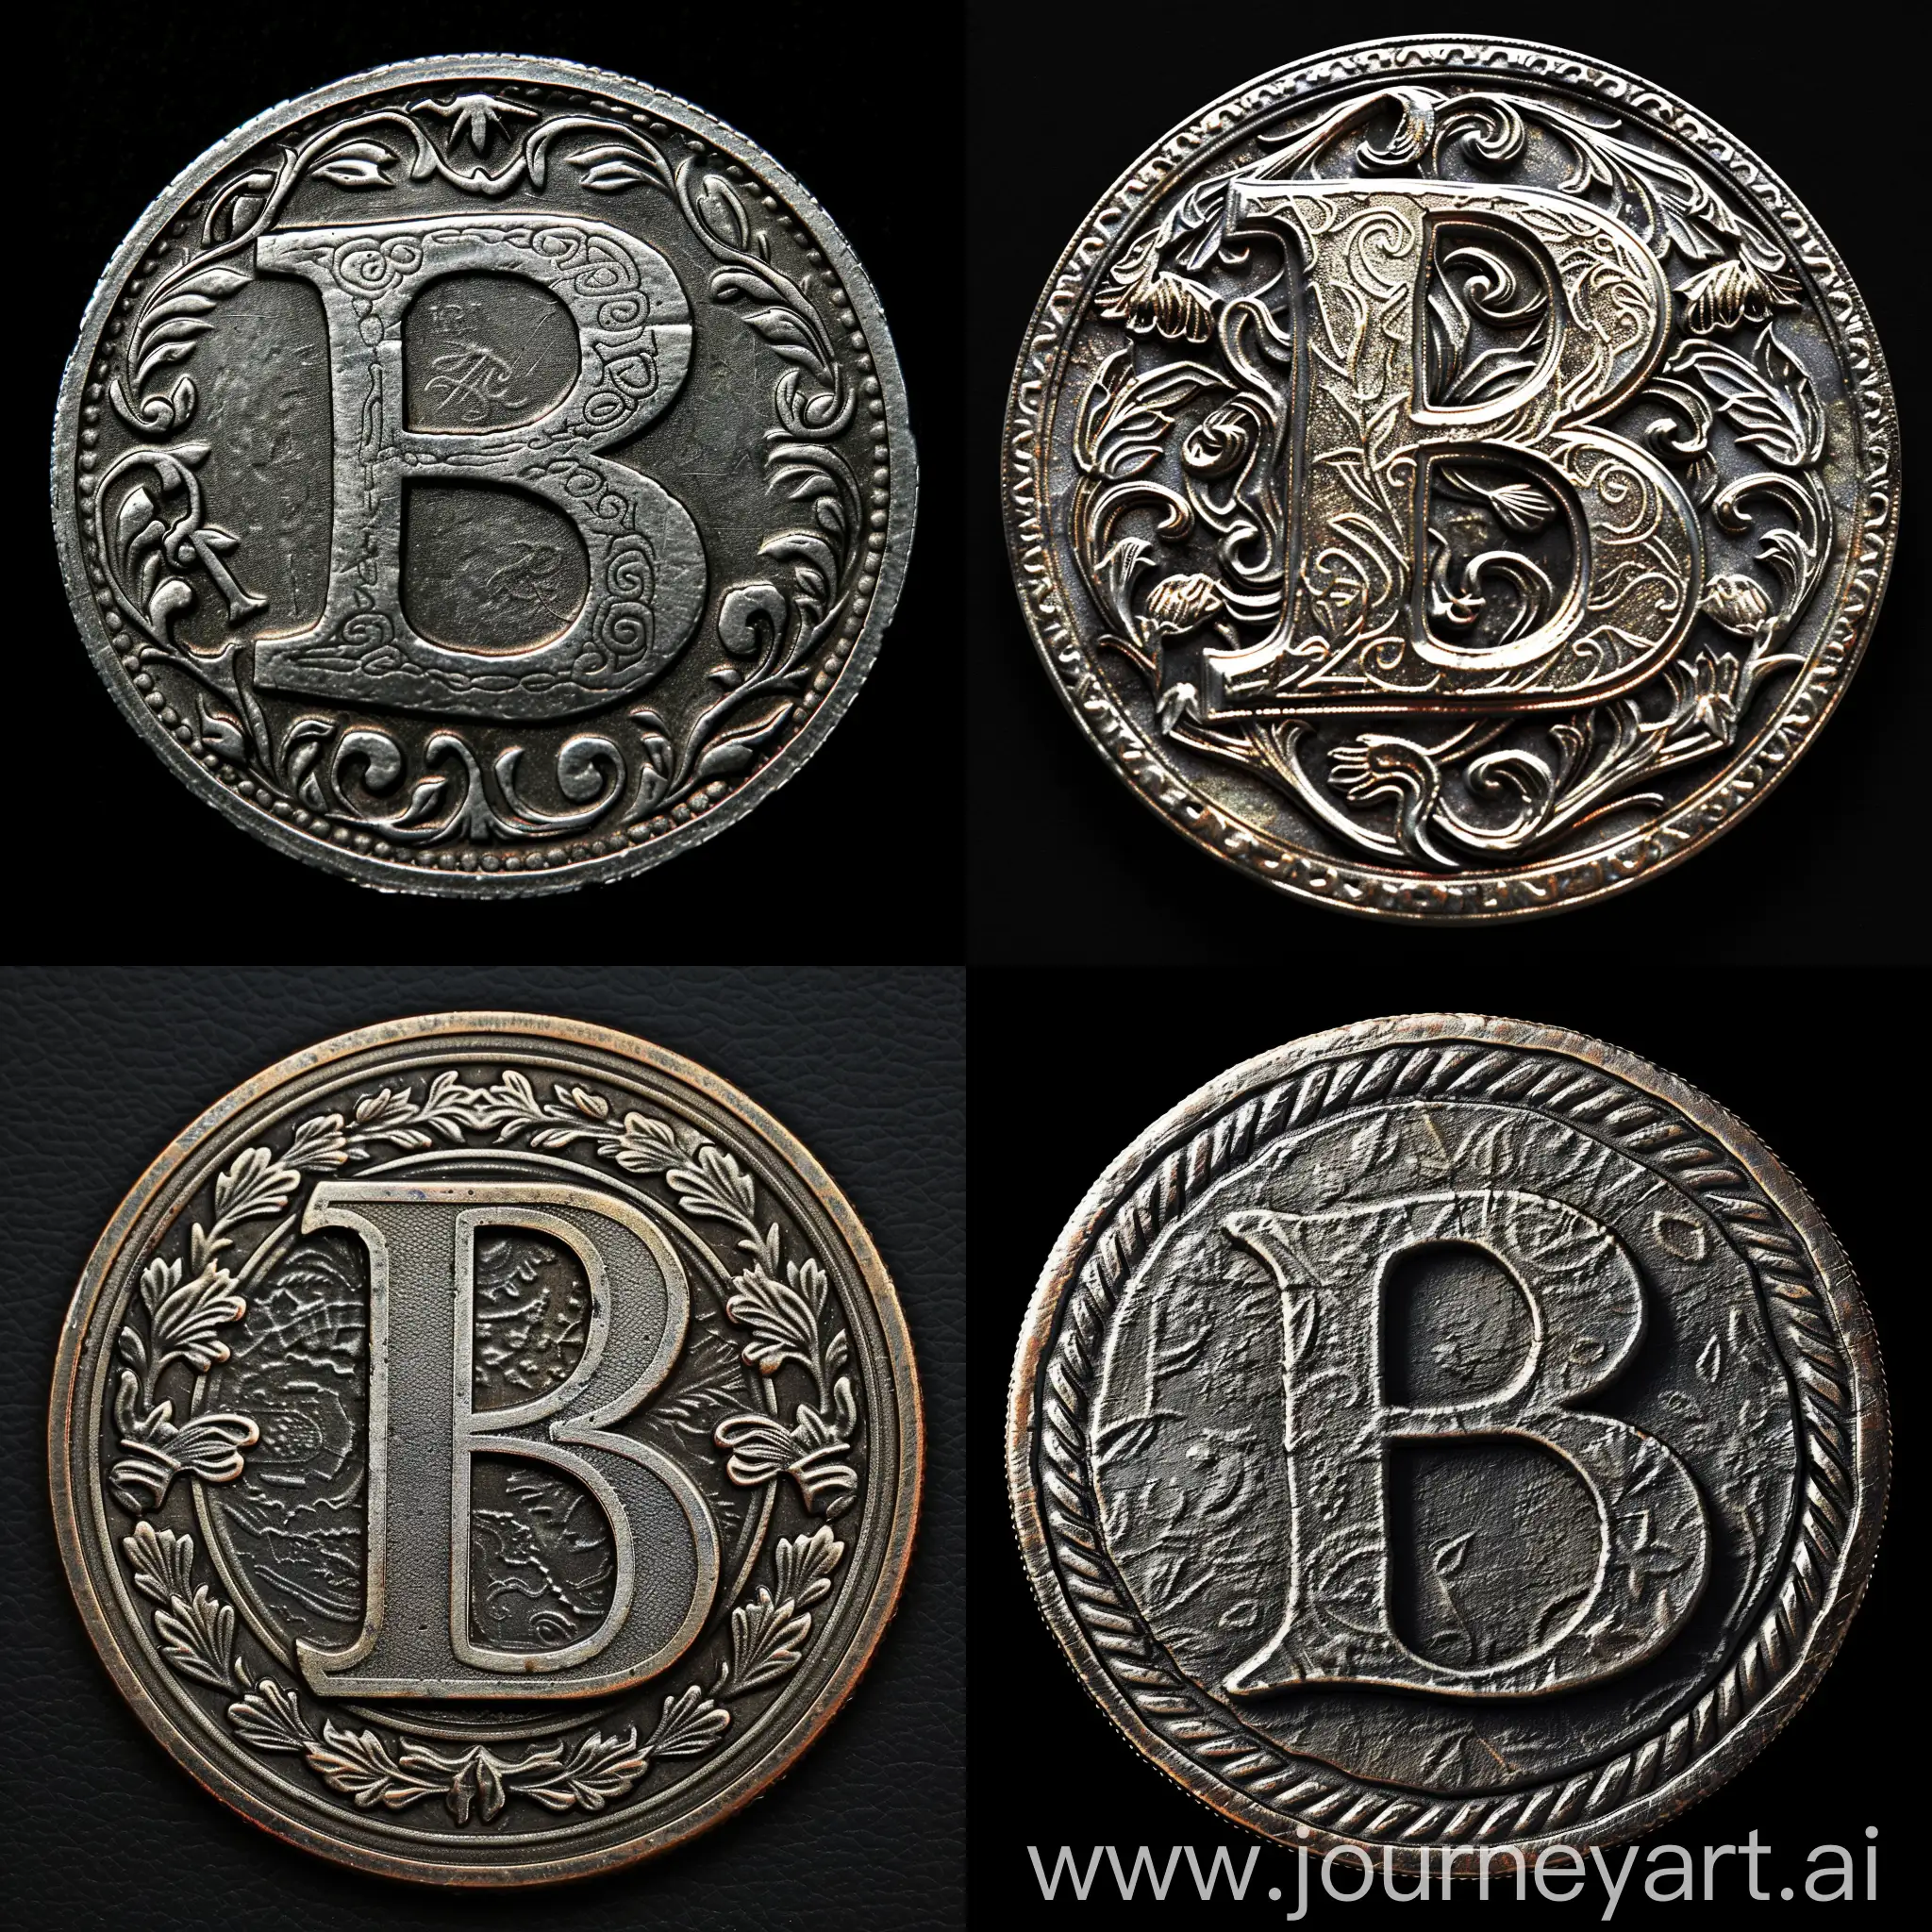 Letter B engraved on a coin on a black background, rtx, fullhd, detailed